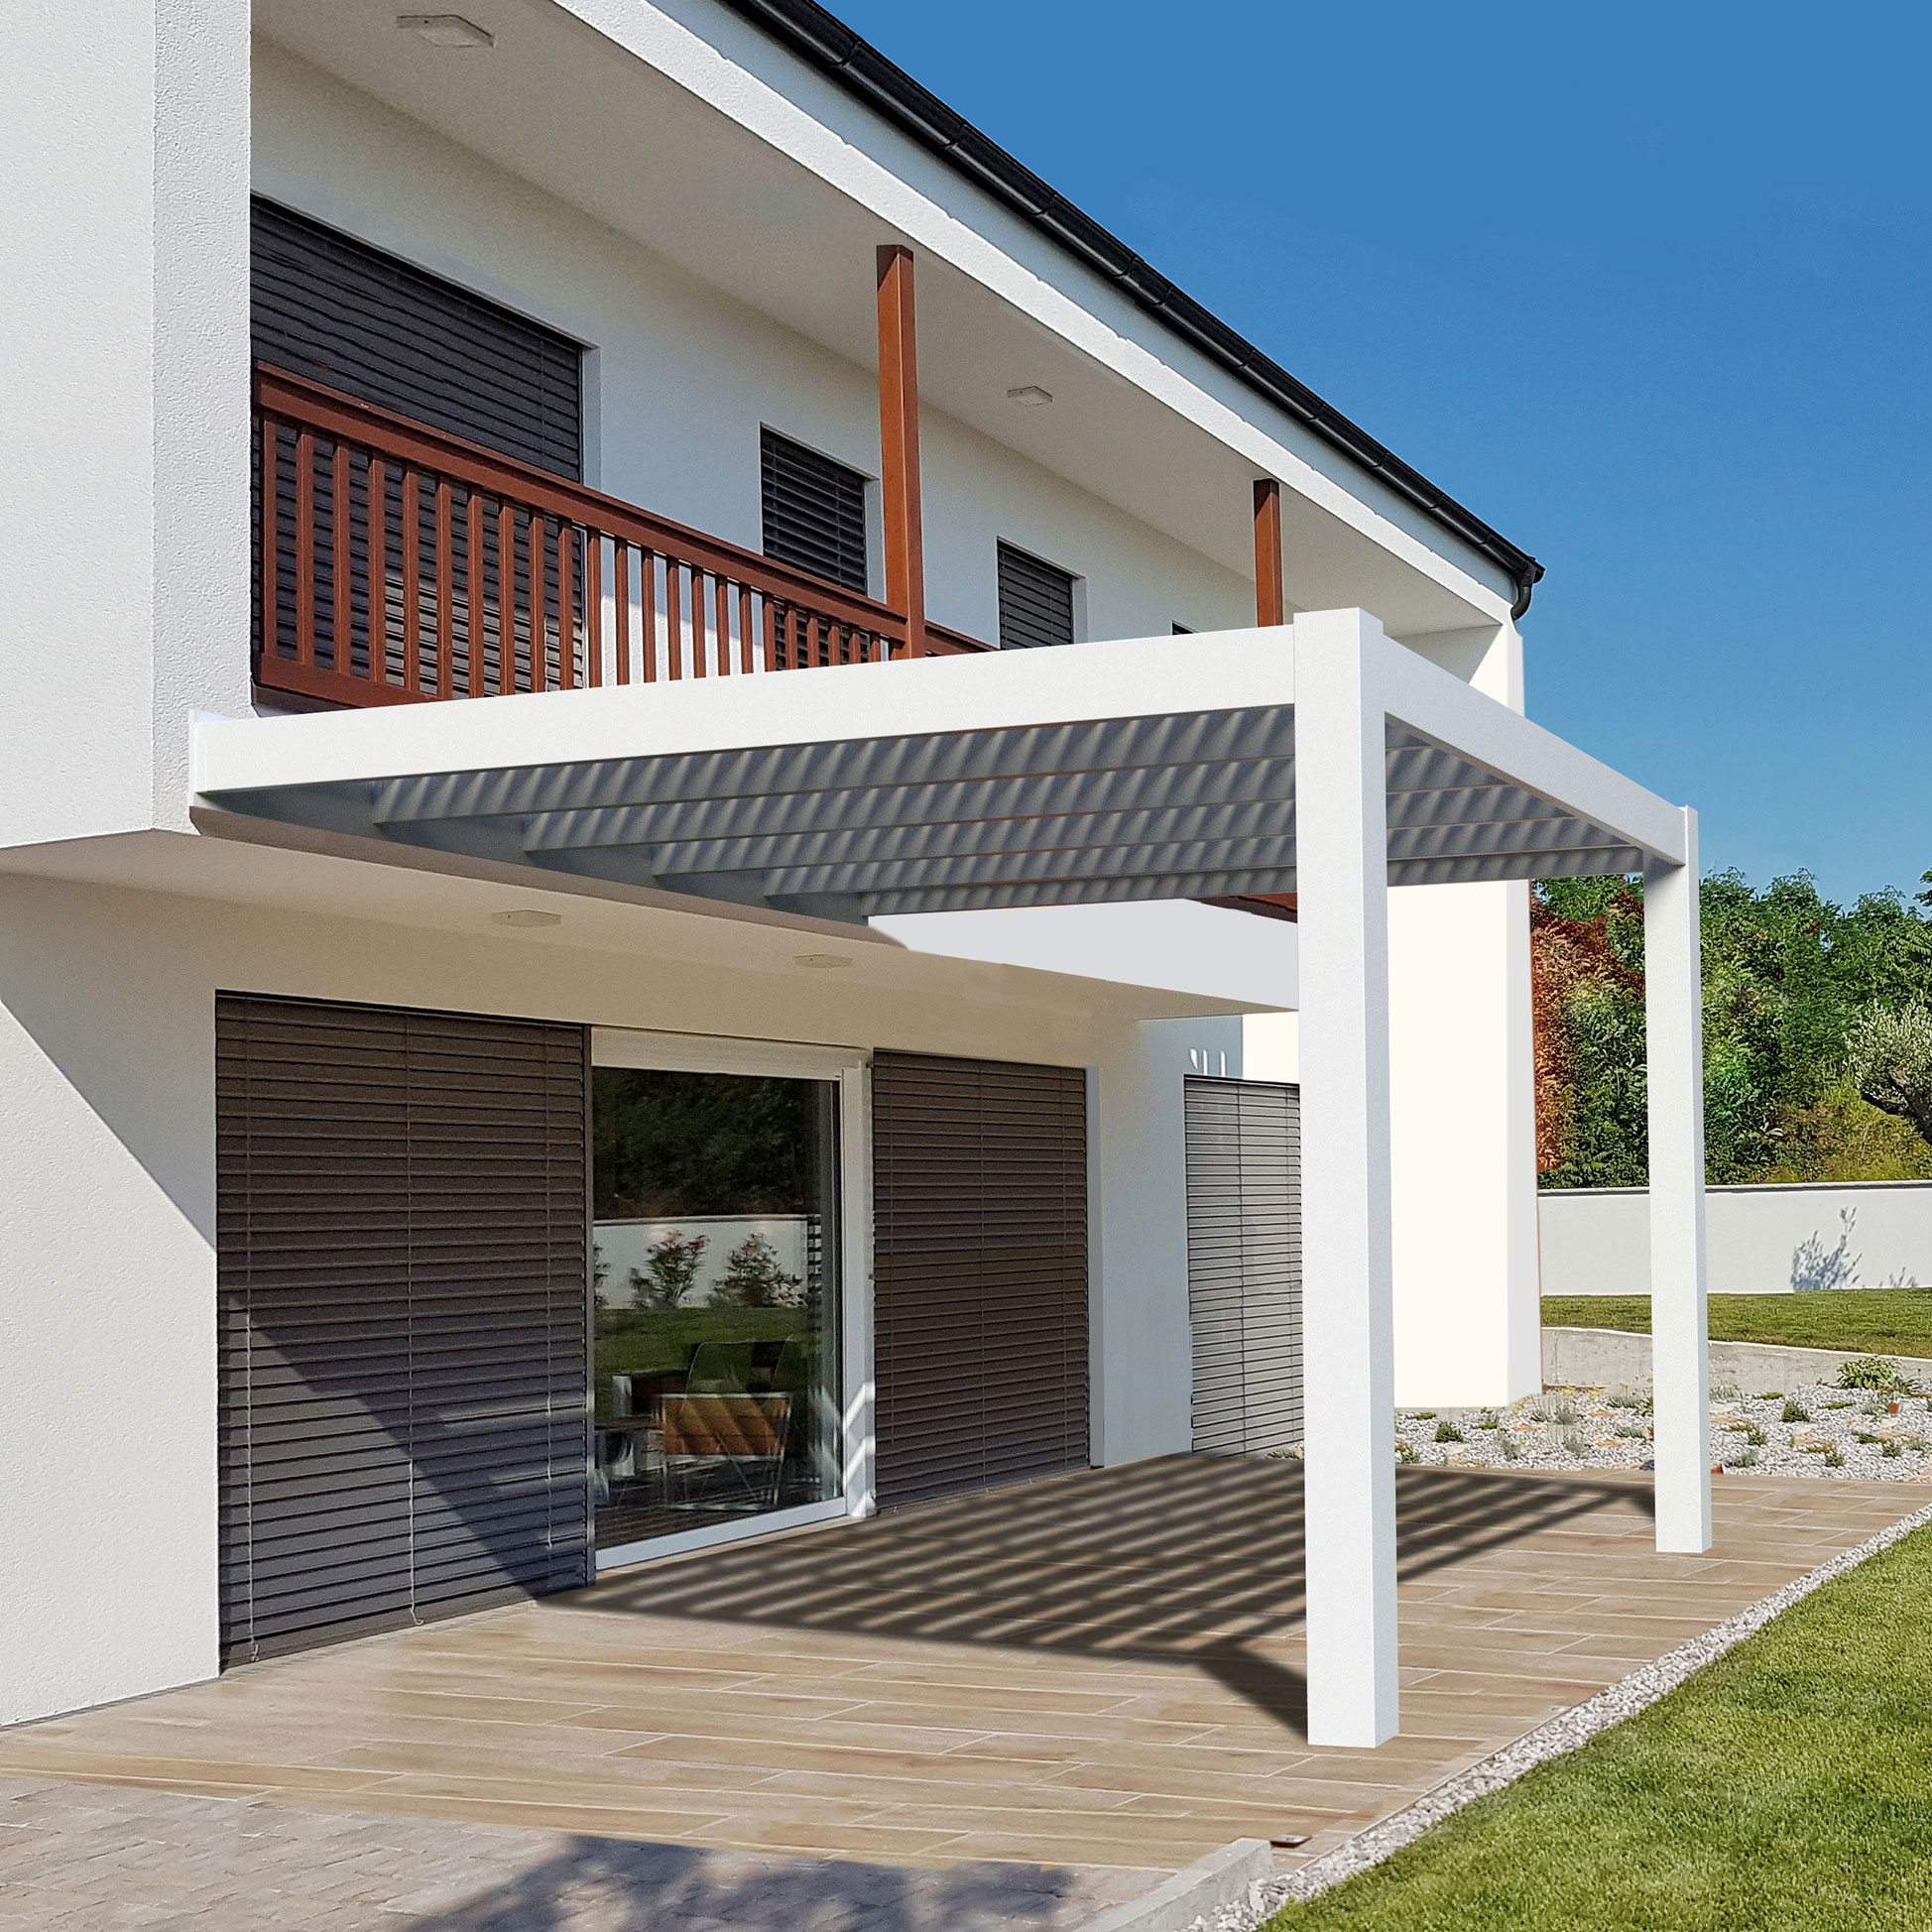 A modern pergola style attached to the wall of a home